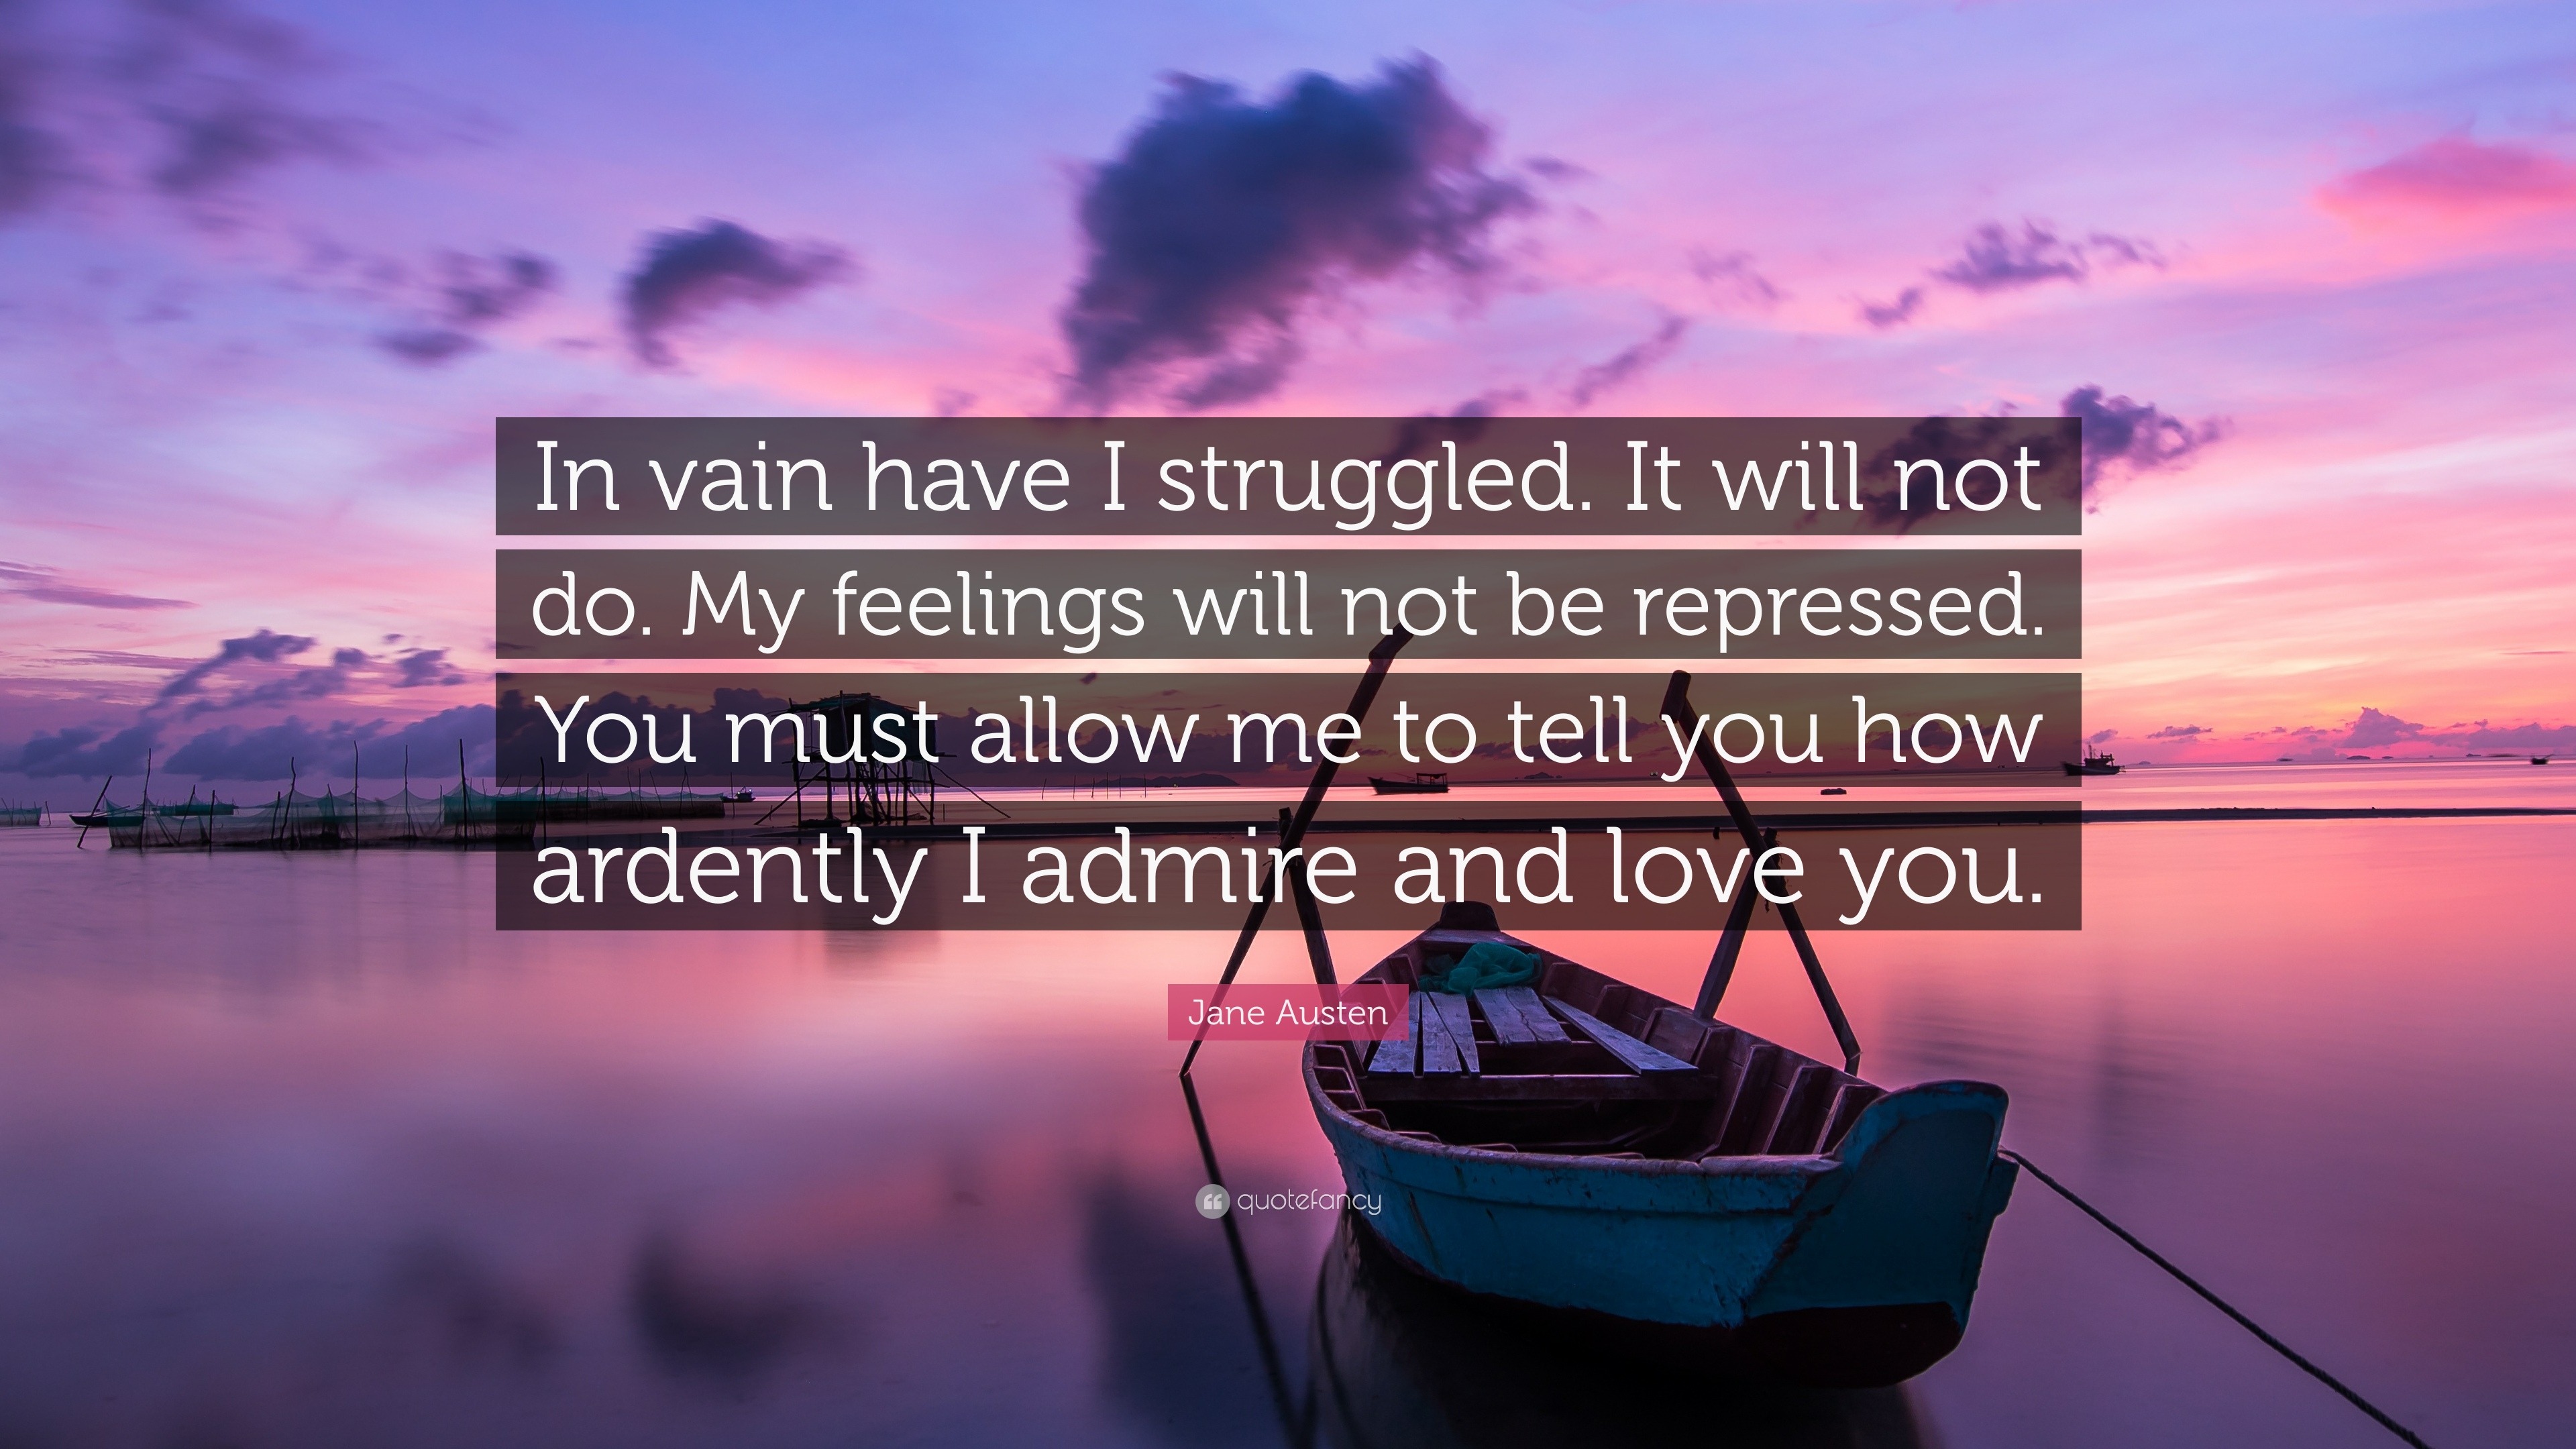 Jane Austen Quote: “In vain have I struggled. It will not do. My ...